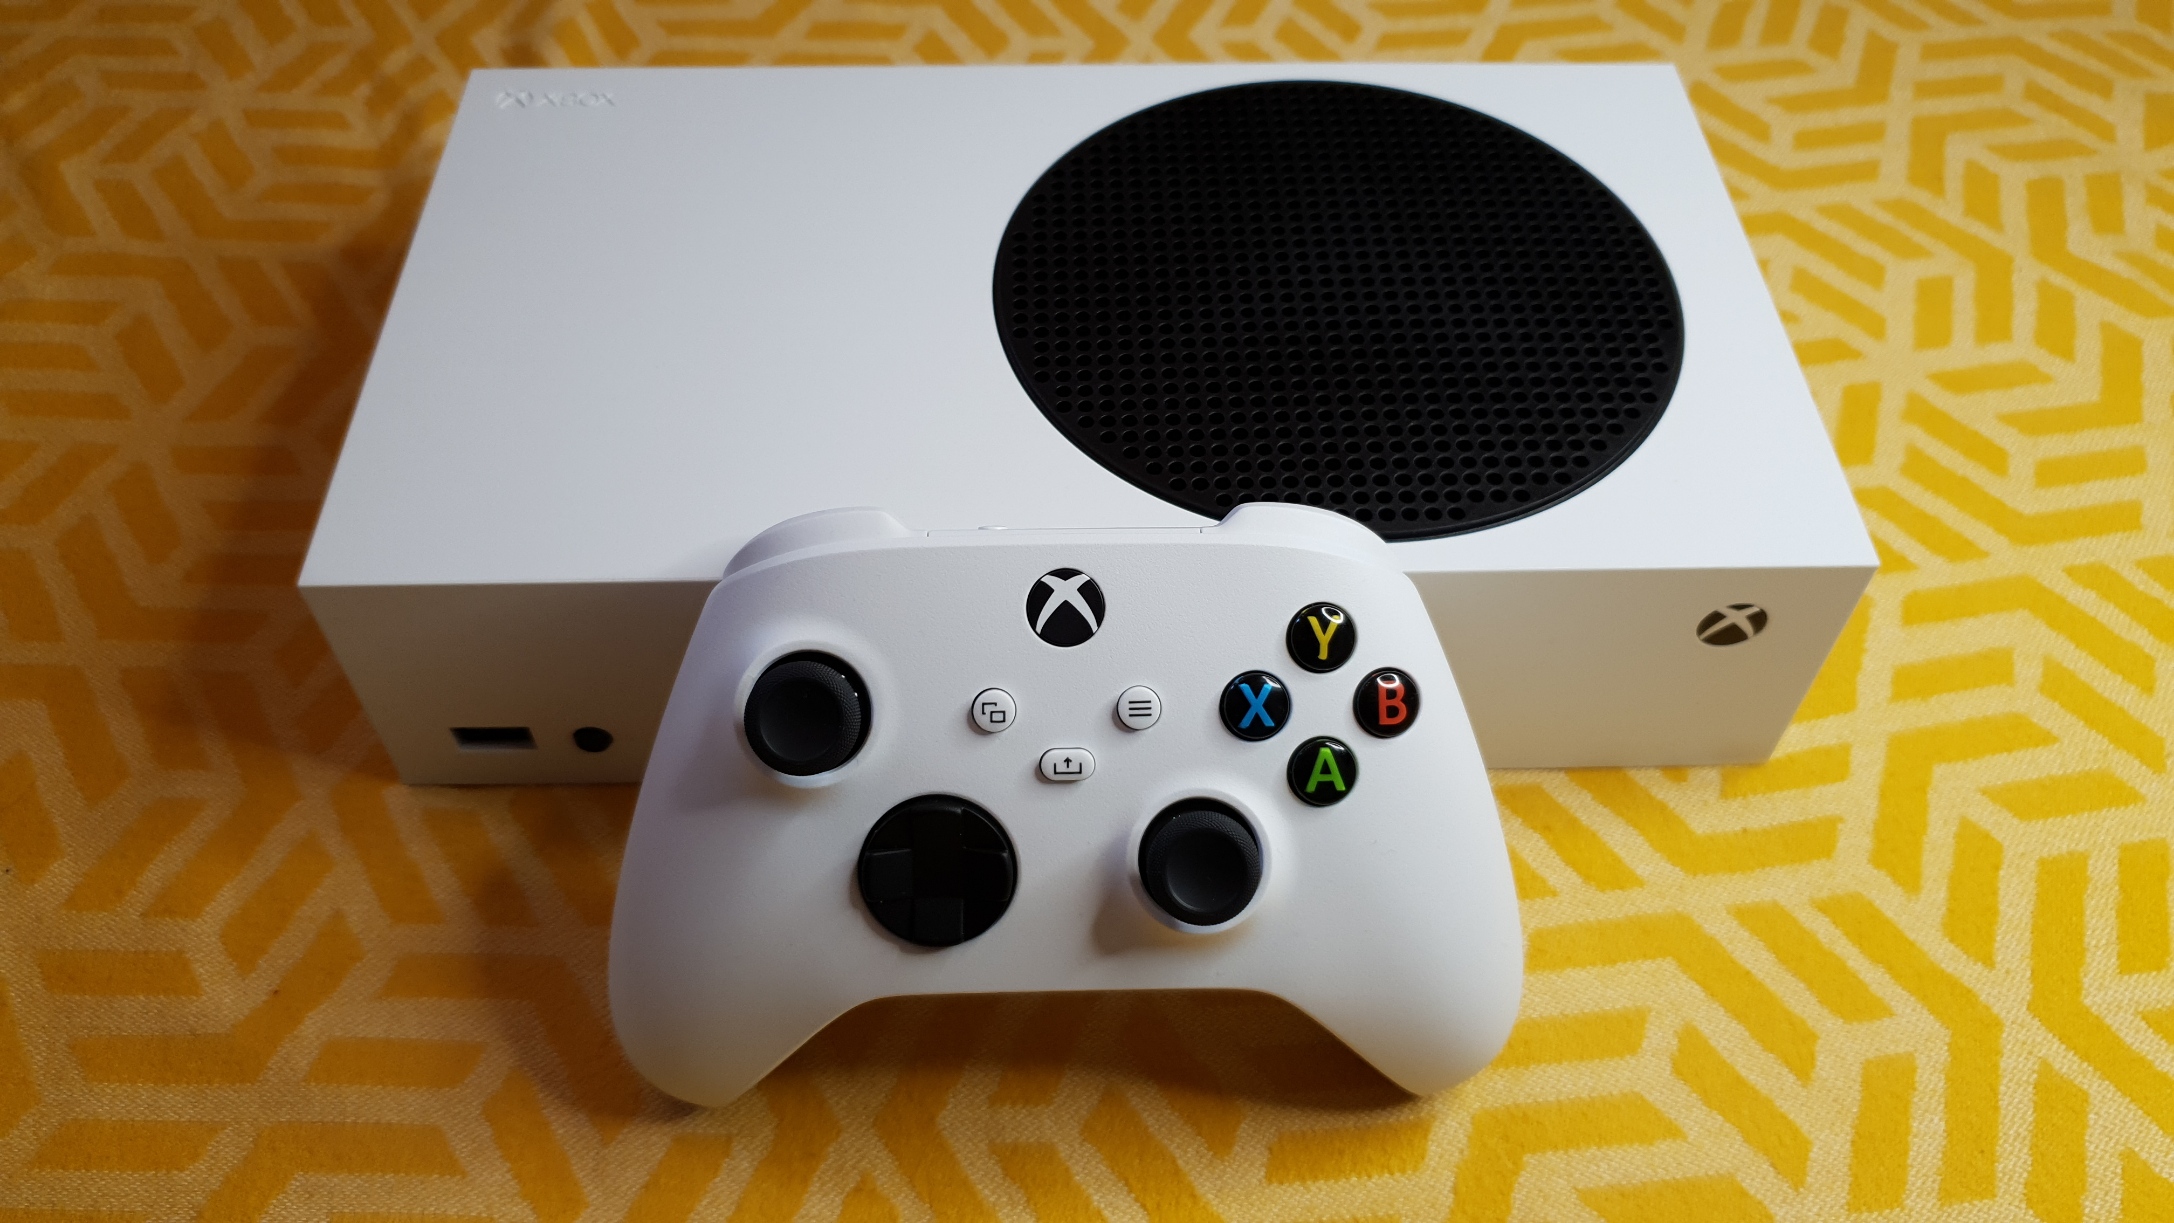 The Xbox Series S console in white